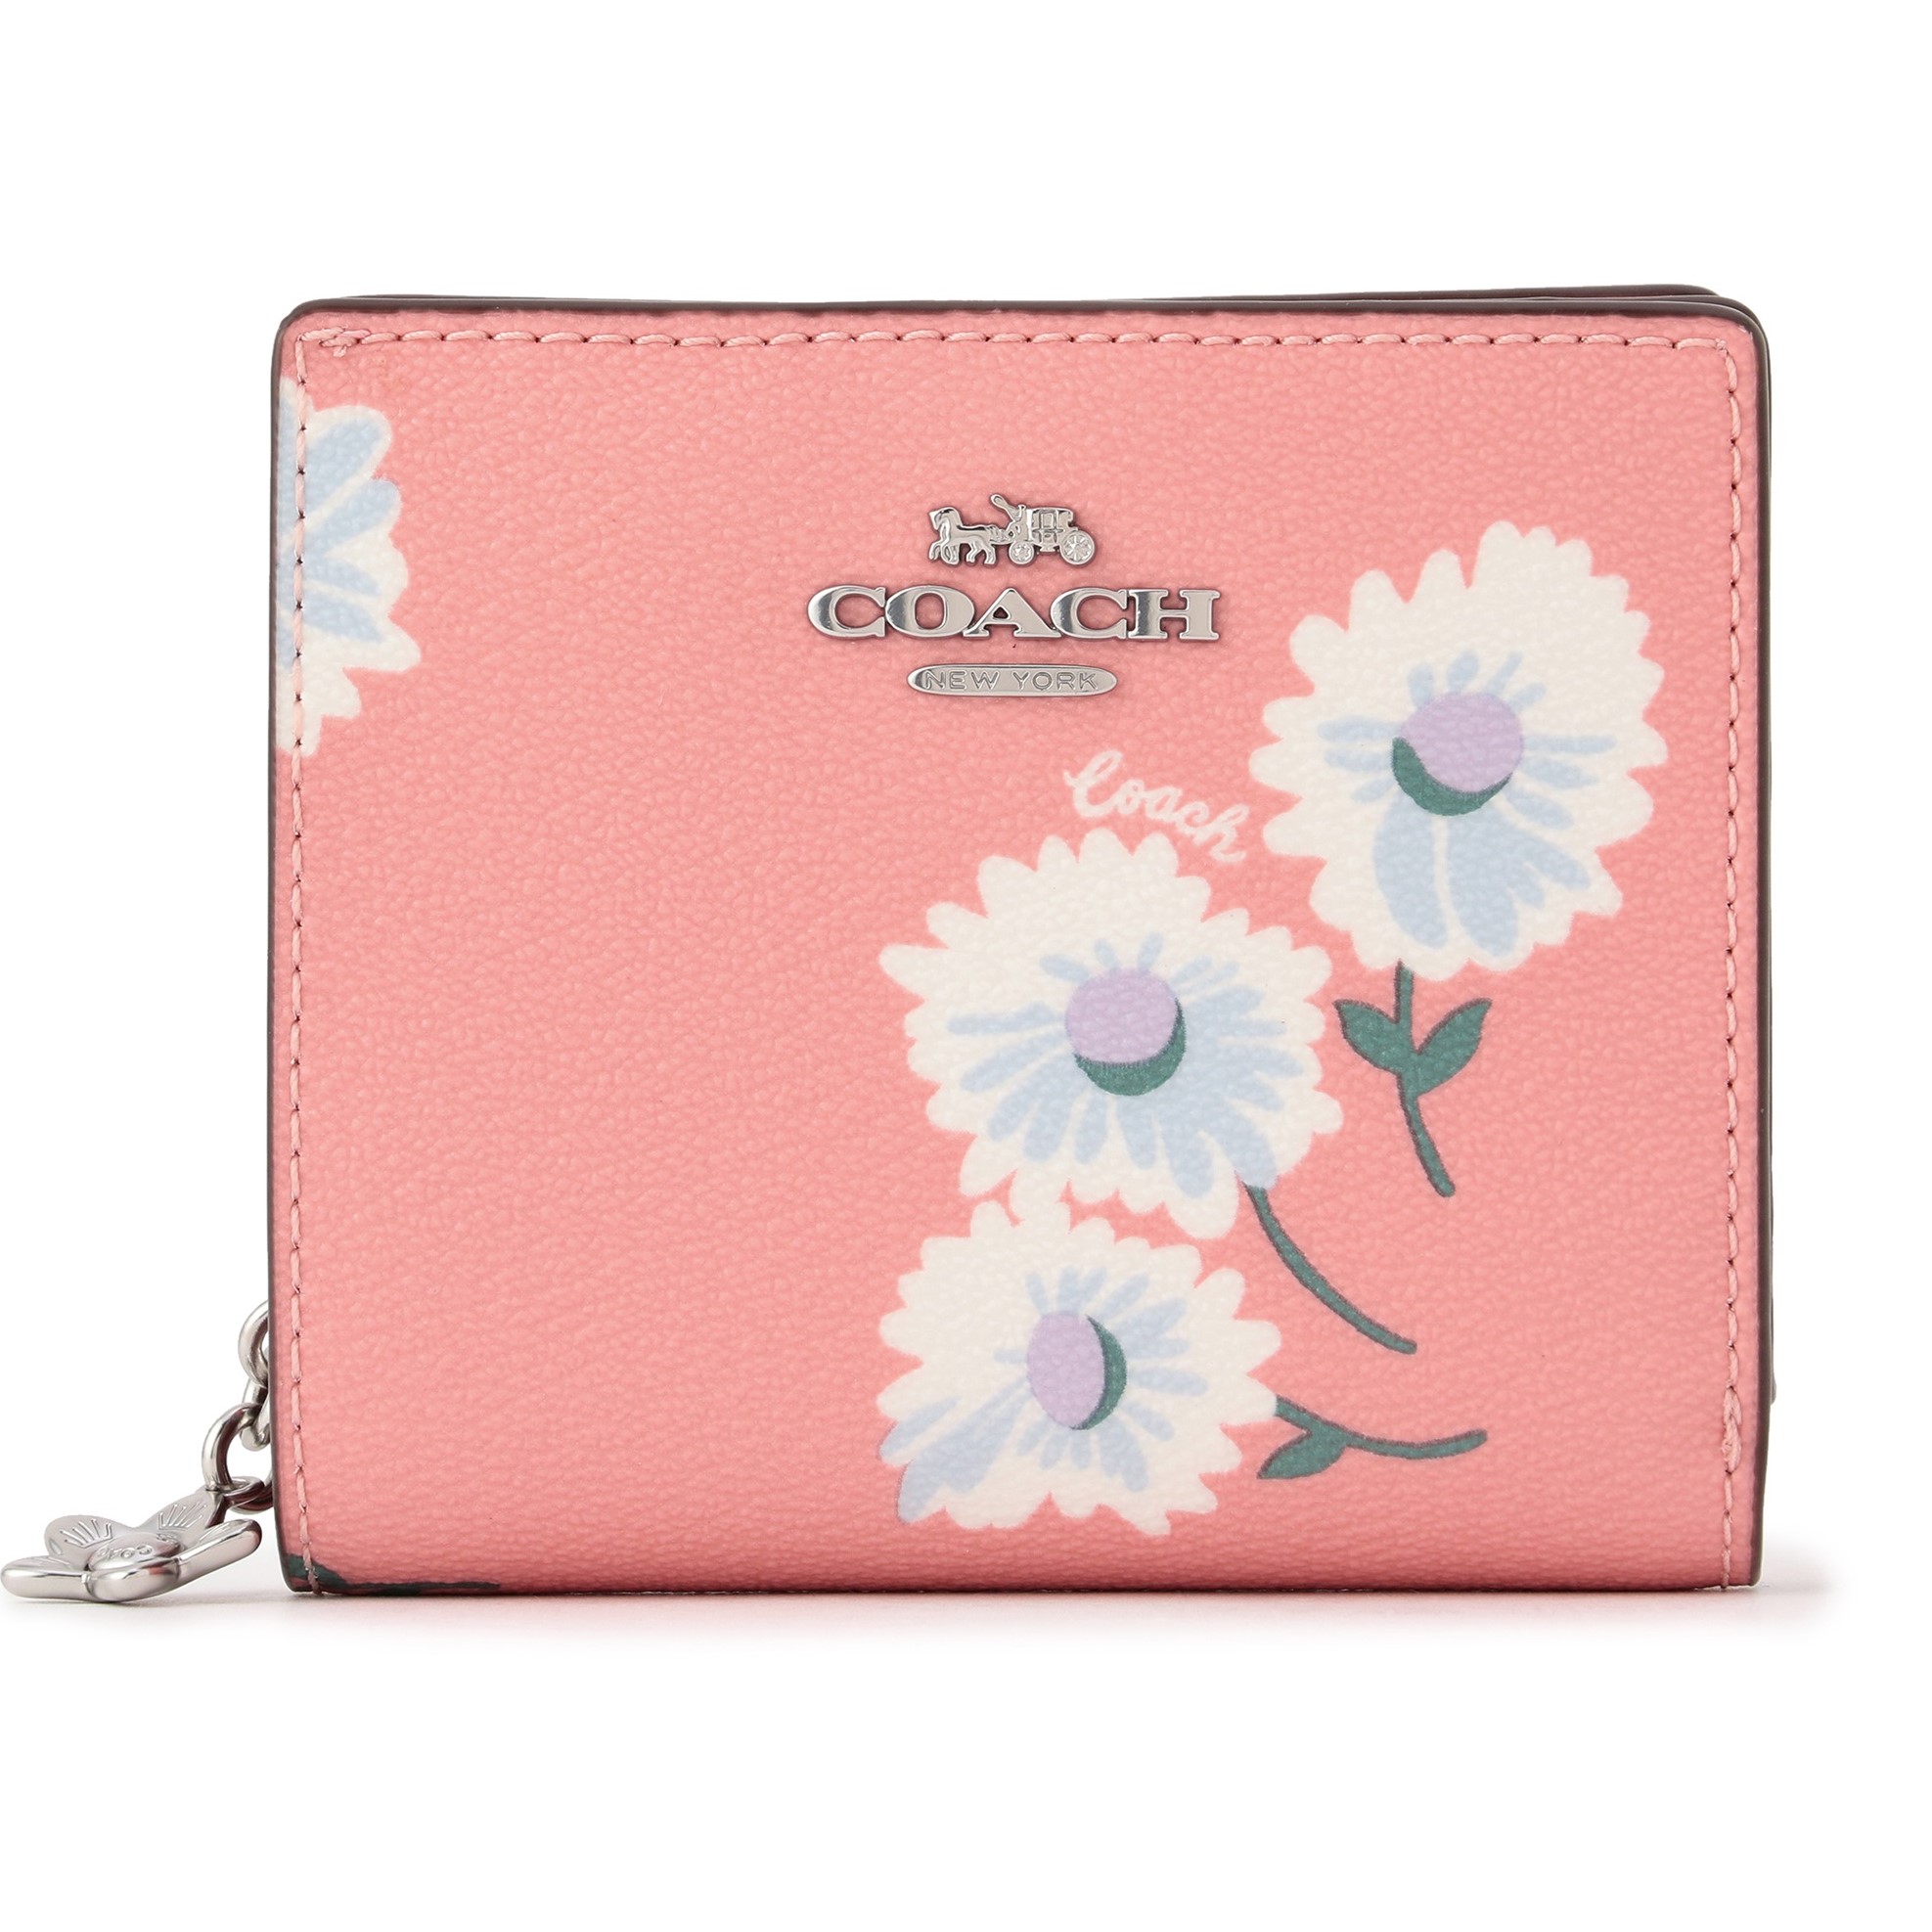 VÍ NỮ NGẮN LIMITED COACH BOXED SNAP WALLET WITH DAISY PRINT C2889 7